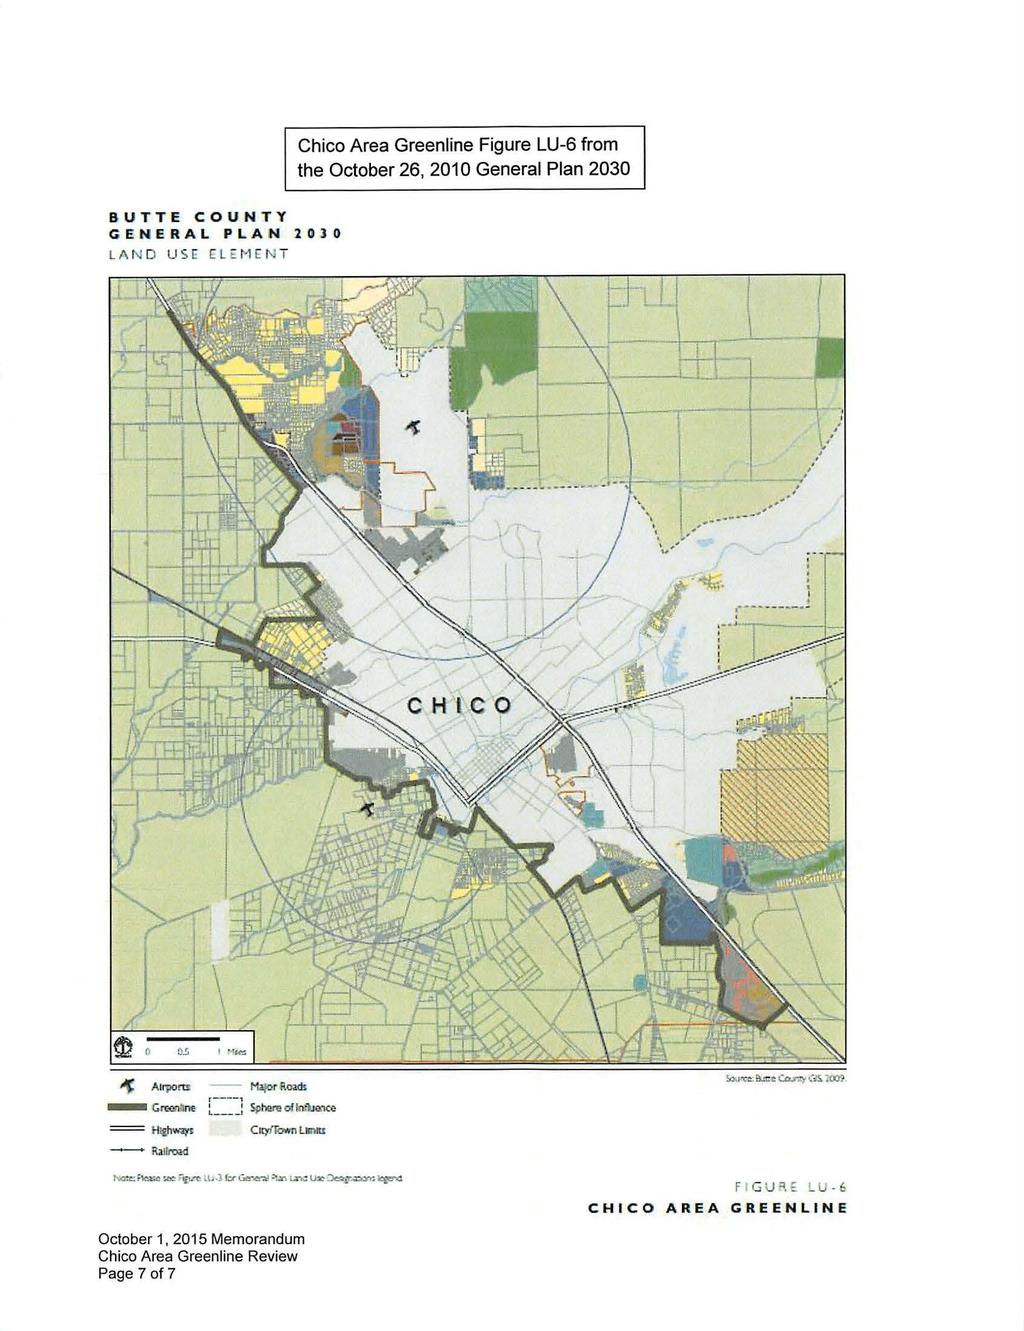 Chico Area Greenline Figure LU-6 from the October 26, 2010 General Plan 2030 BUTTE COUNTY GENERAL PLAN lolo LA N D USE l ~M N T ~